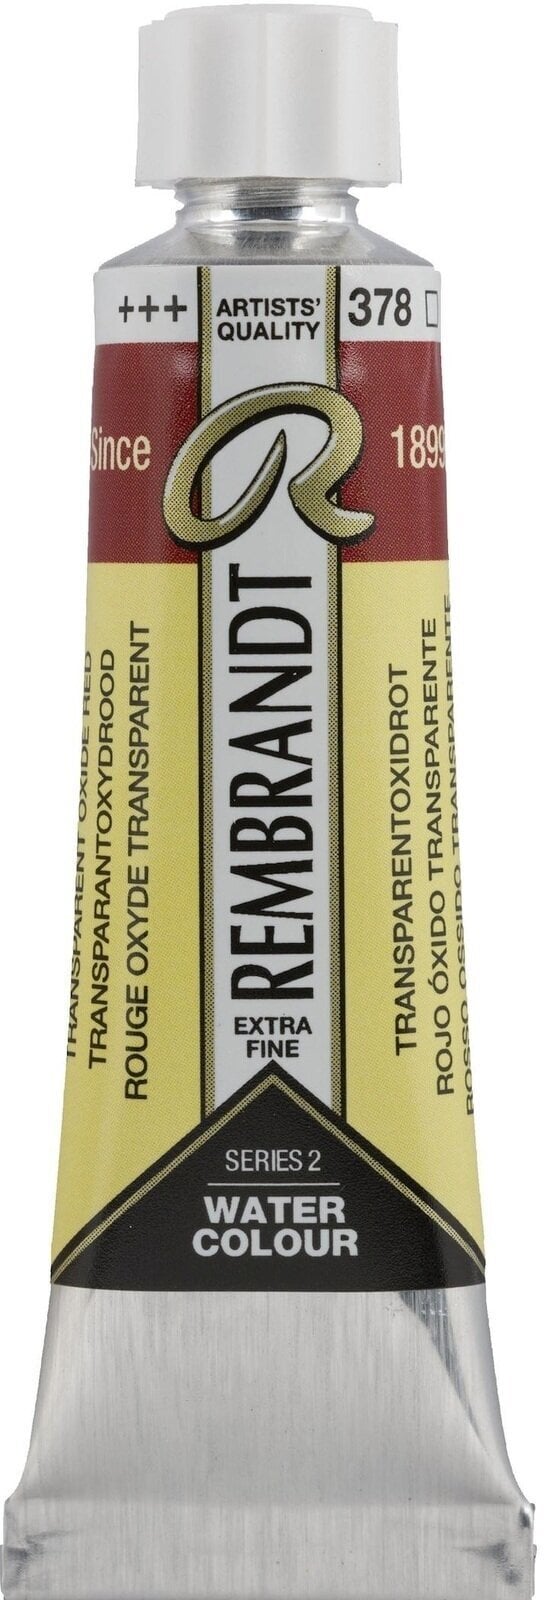 Nερομπογιά Rembrandt Watercolour Paint 10 ml Transparent Oxide Red